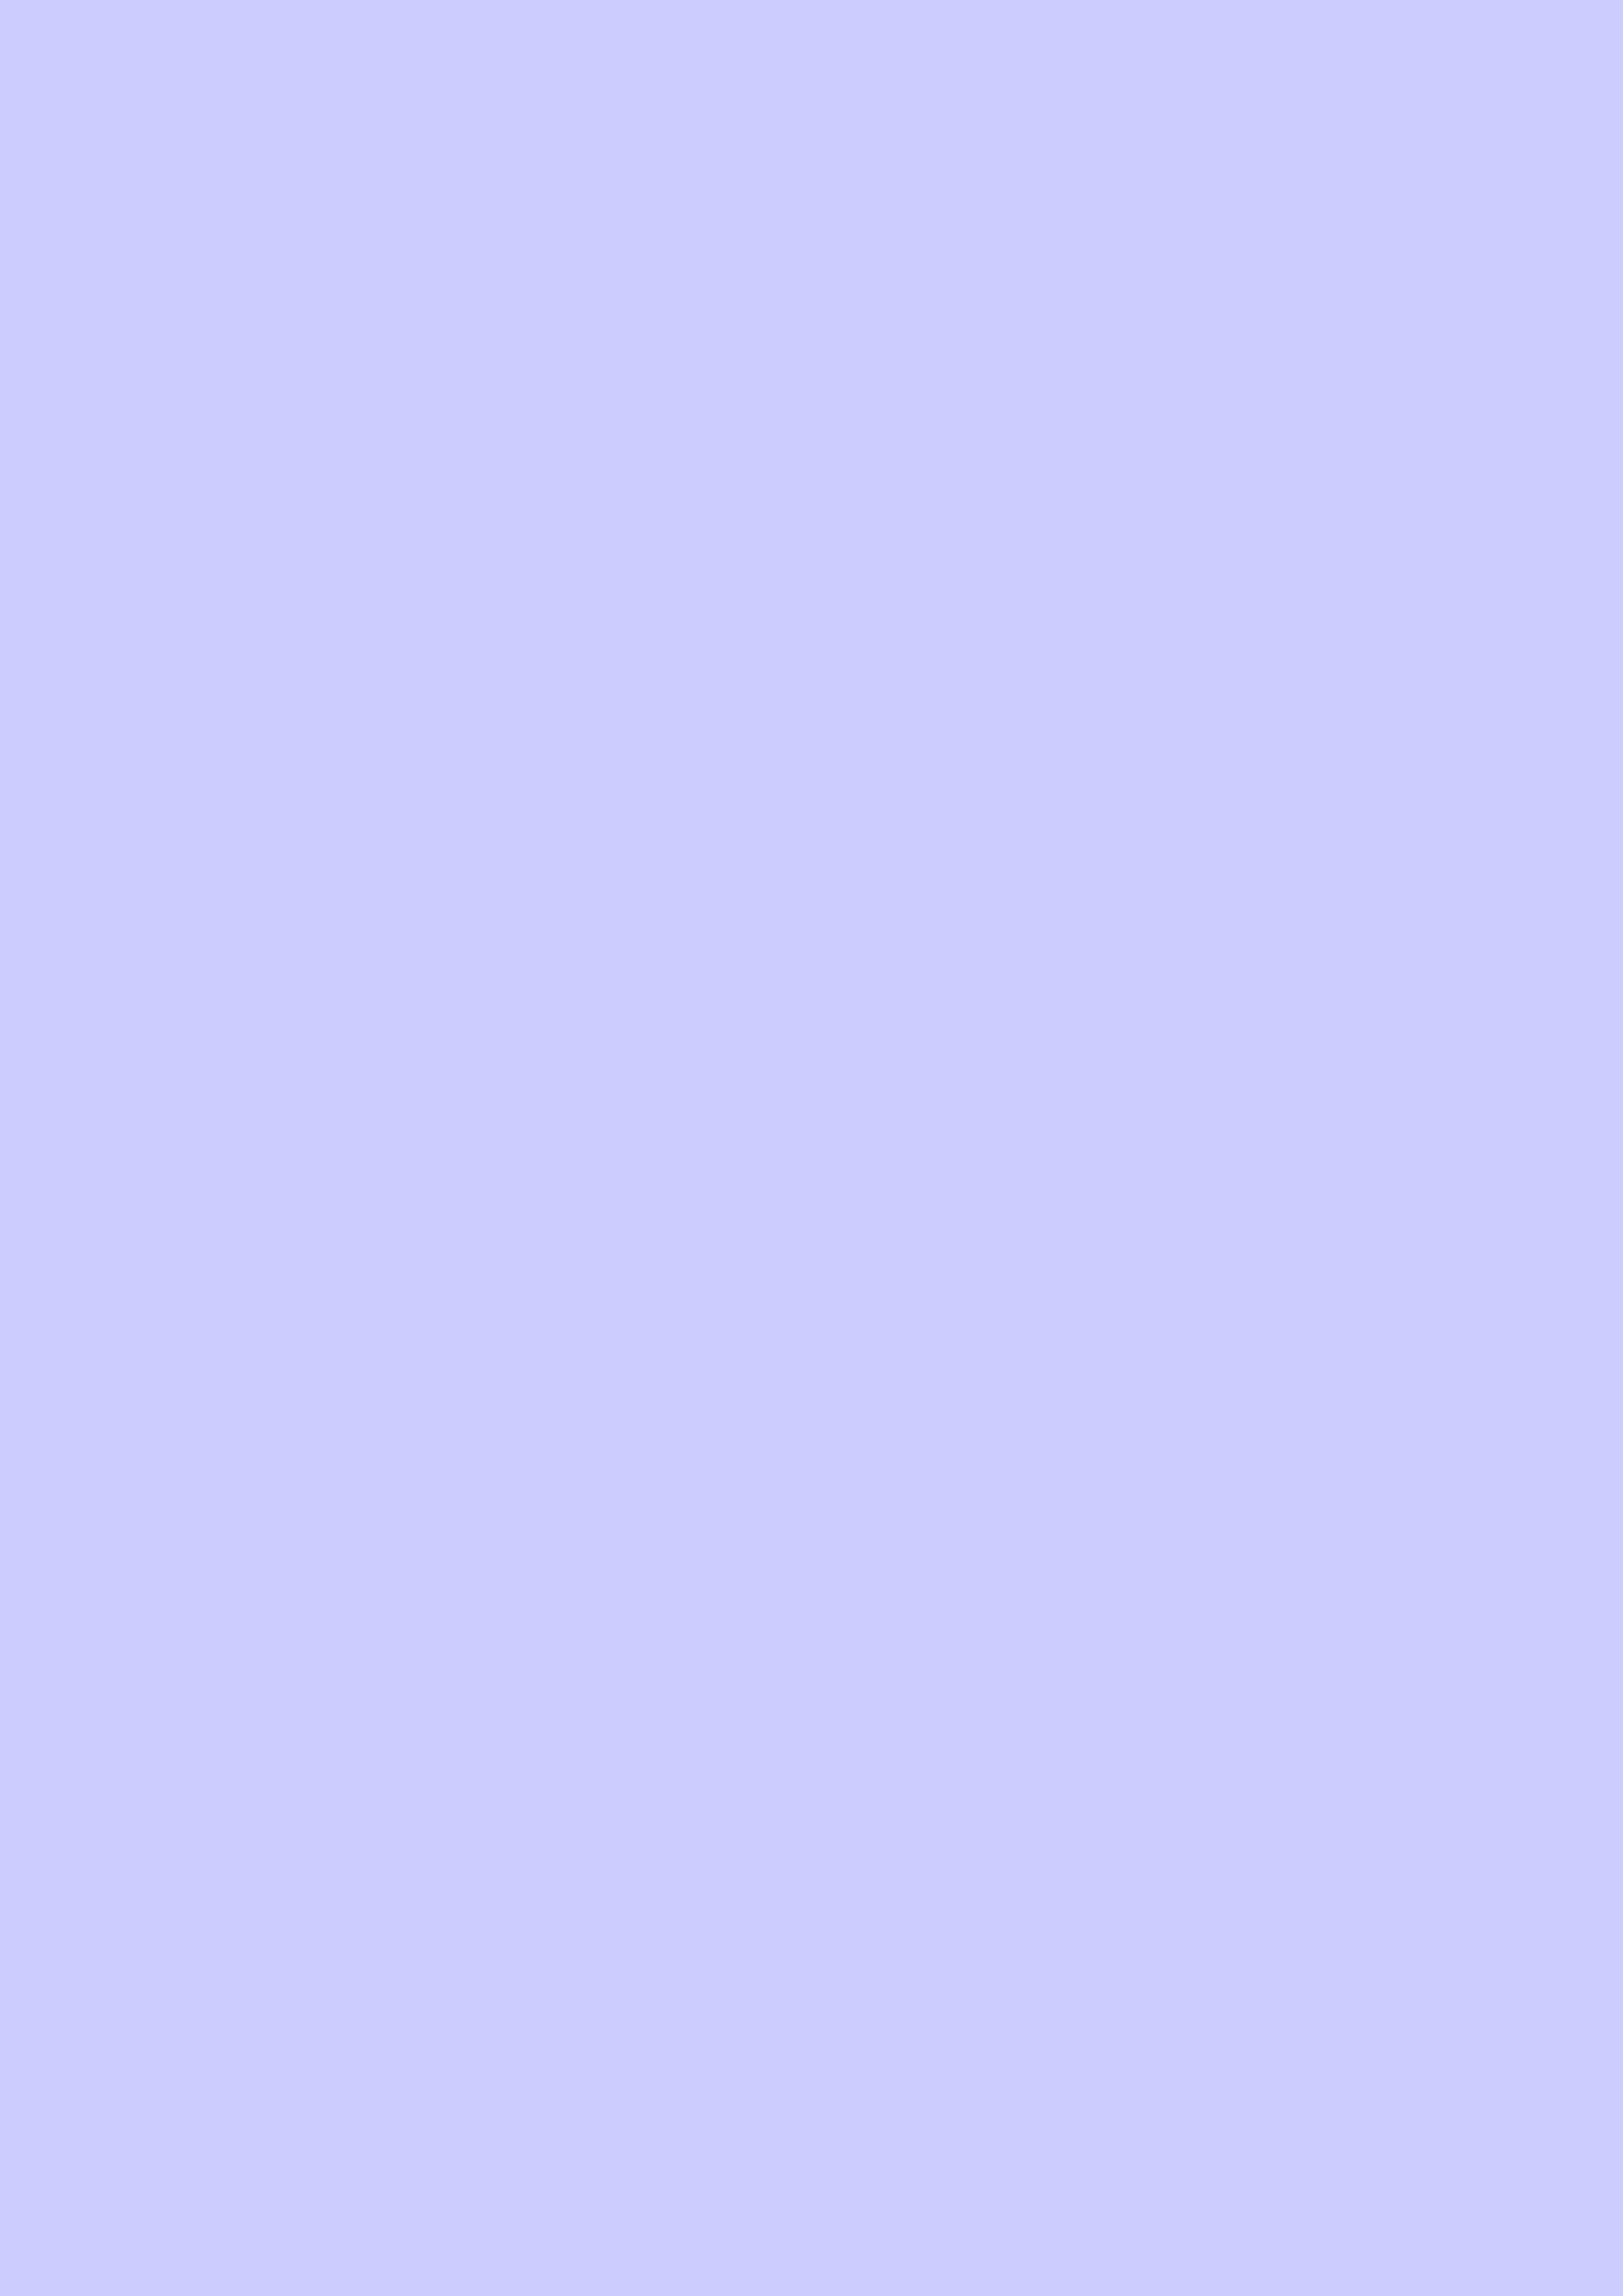 2480x3508 Periwinkle Solid Color Background